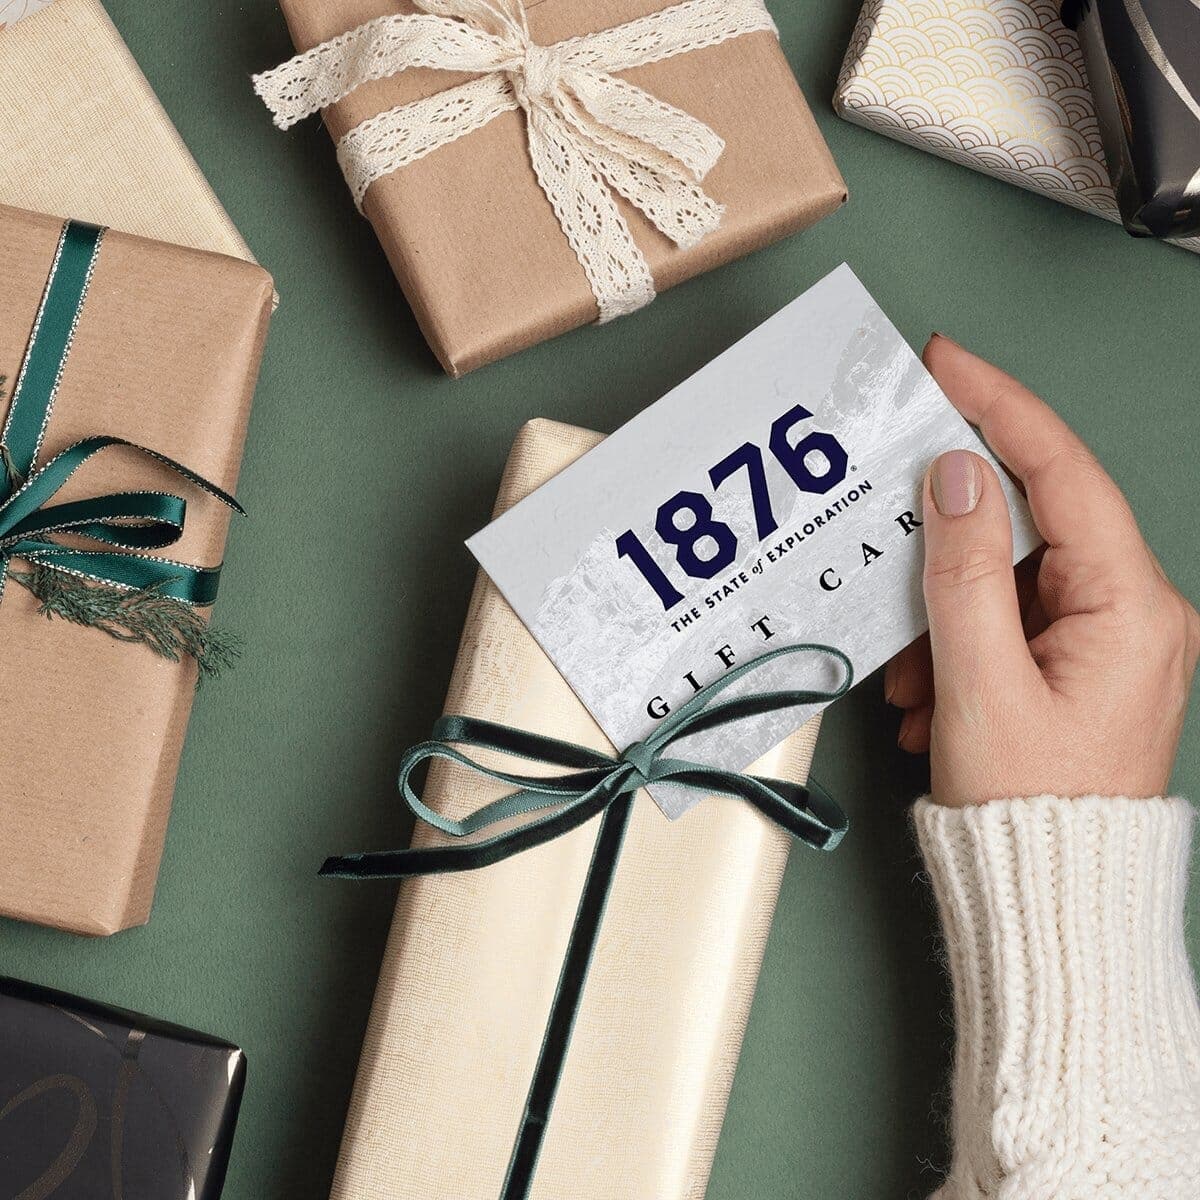 1876 Gift Card - 1876 | The State of Exploration